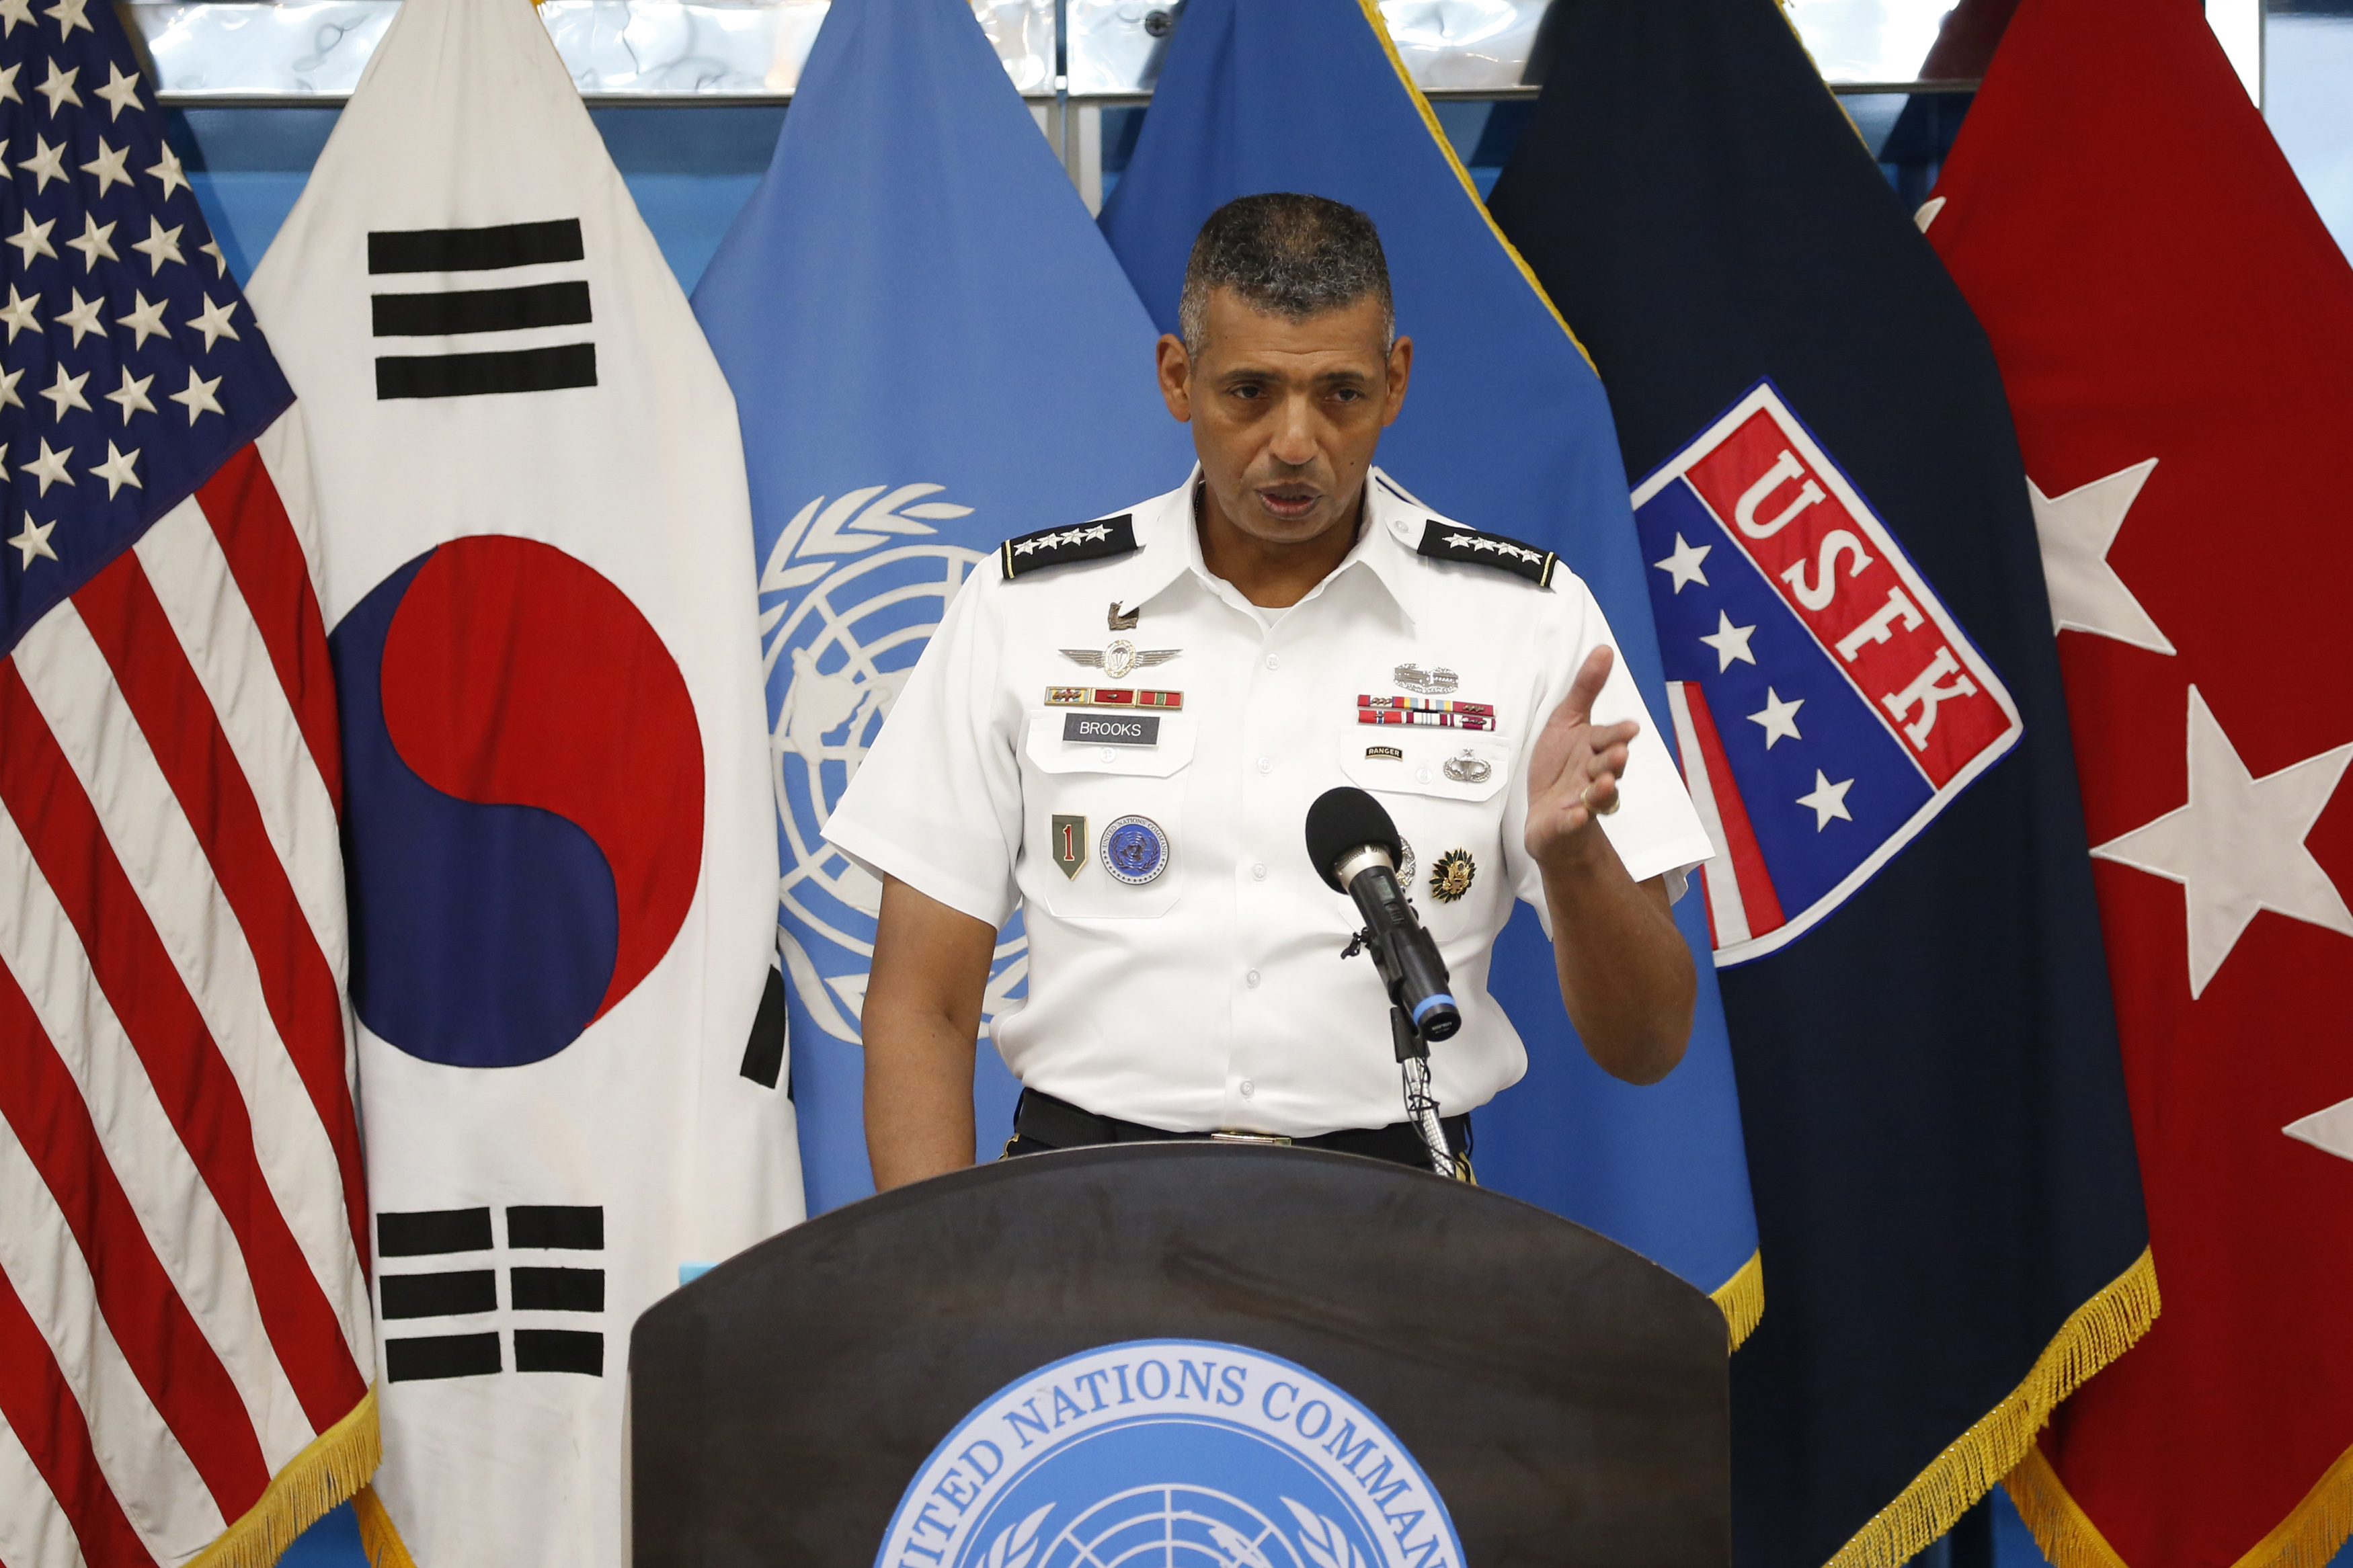 Commander of the United Nations Command, Combined Forces Command, and United States Forces Korea, General Vincent K. Brooks, speaks during a ceremony marking the 63rd anniversary of the signing of the Korean War ceasefire armistice agreement at the truce village of Panmunjom, along the Demilitarized Zone (DMZ) on July 27, 2016. The armistice agreement on July 27, 1953 brought three years of active combat in the Korean War to a halt, but the two Koreas are still technically at war as no formal peace treaty was signed. / AFP PHOTO / POOL / KIM HONG-JI